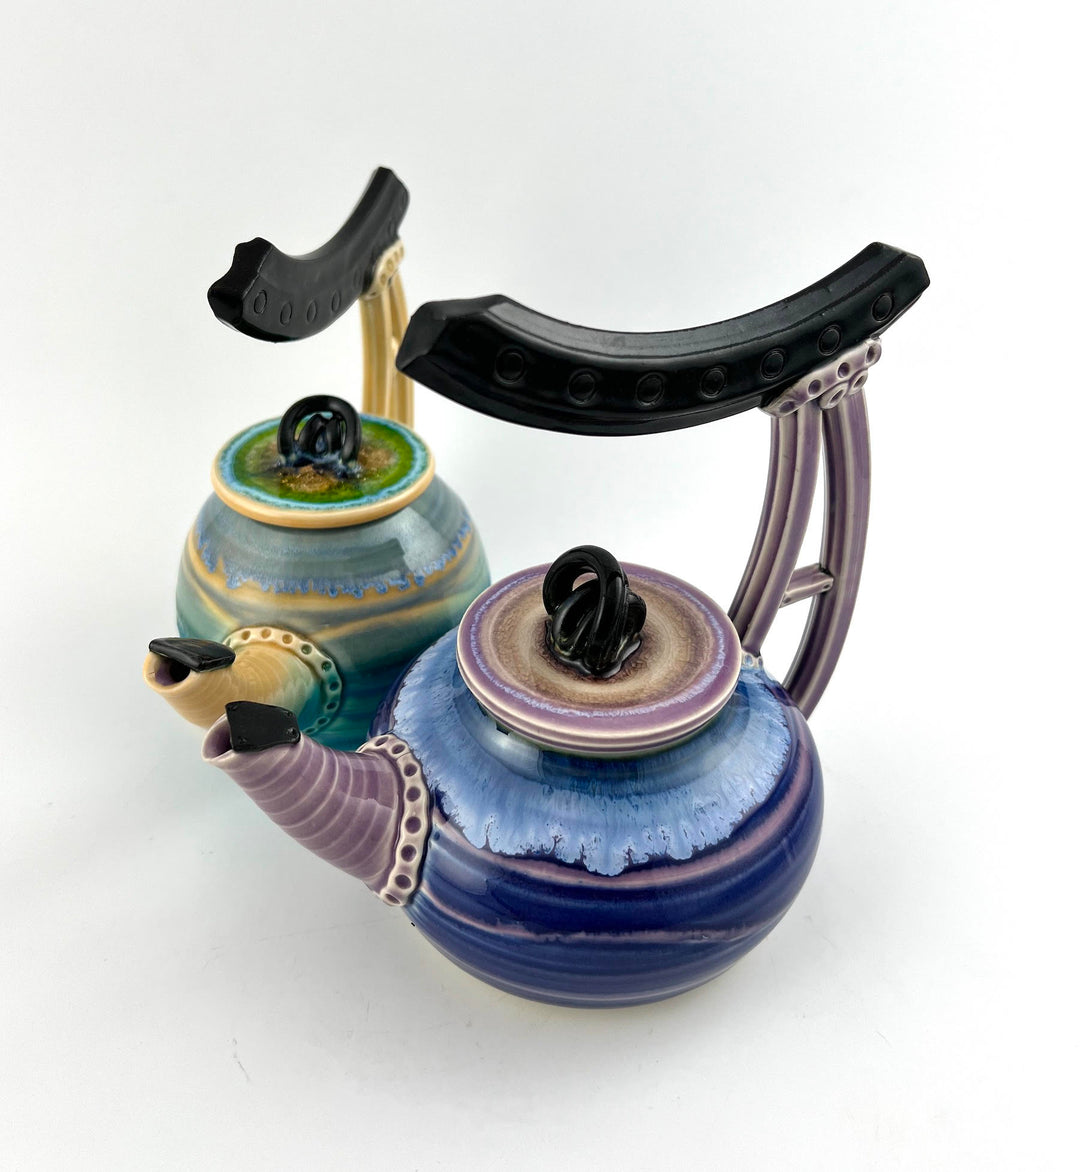 April 2023 | Hector Kriete (He/Him) - Smokeware: Pipes & Bubblers